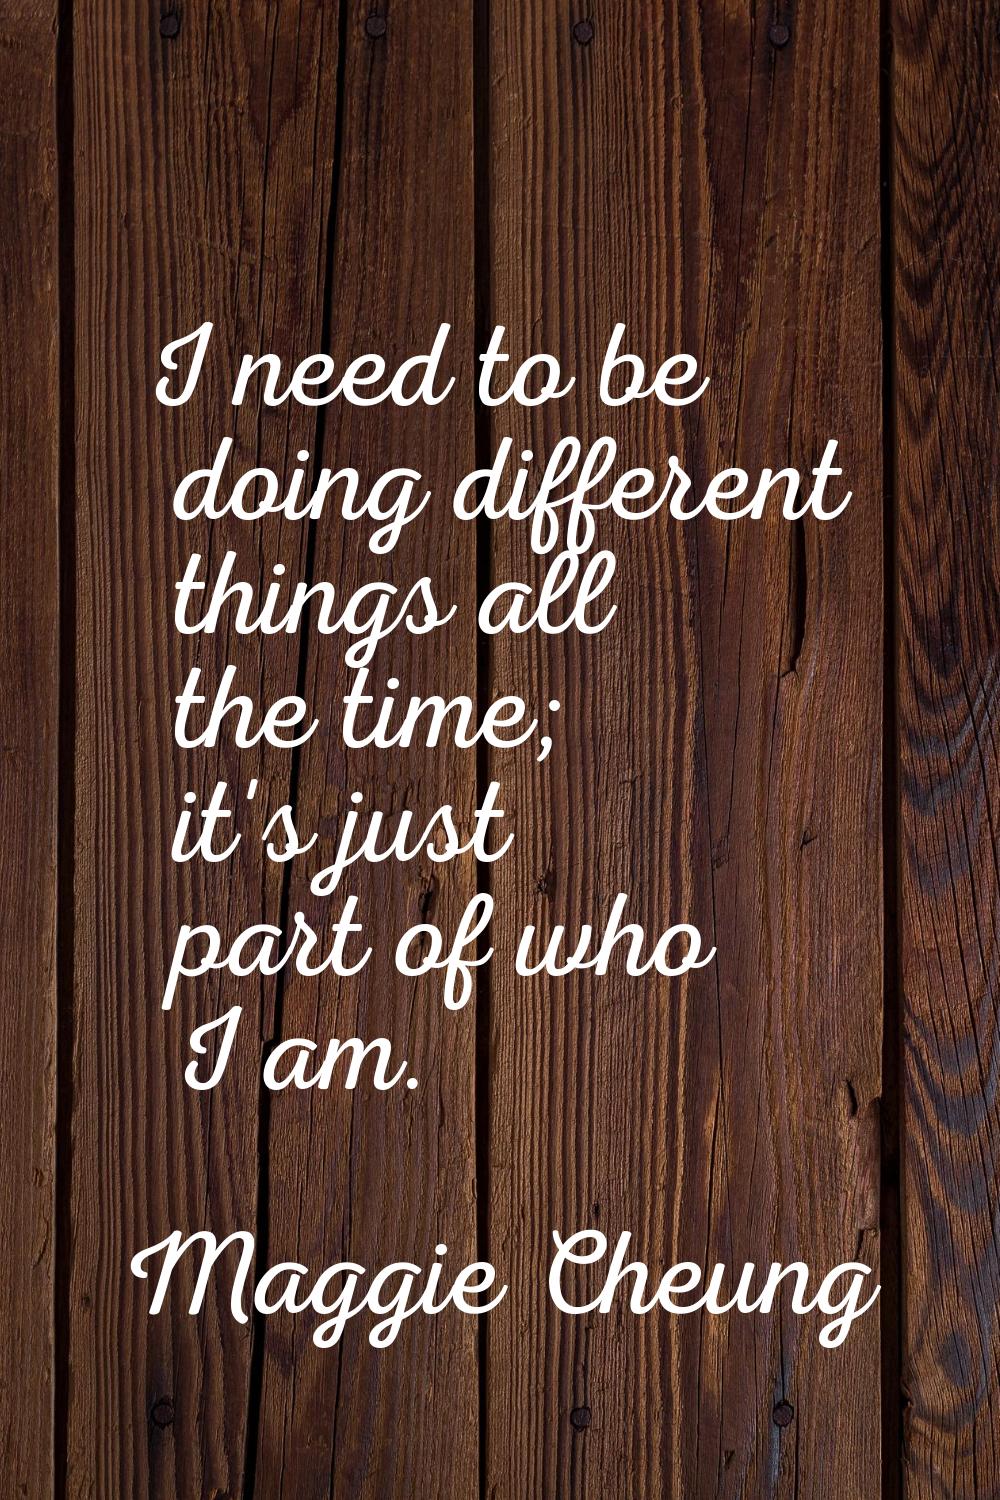 I need to be doing different things all the time; it's just part of who I am.